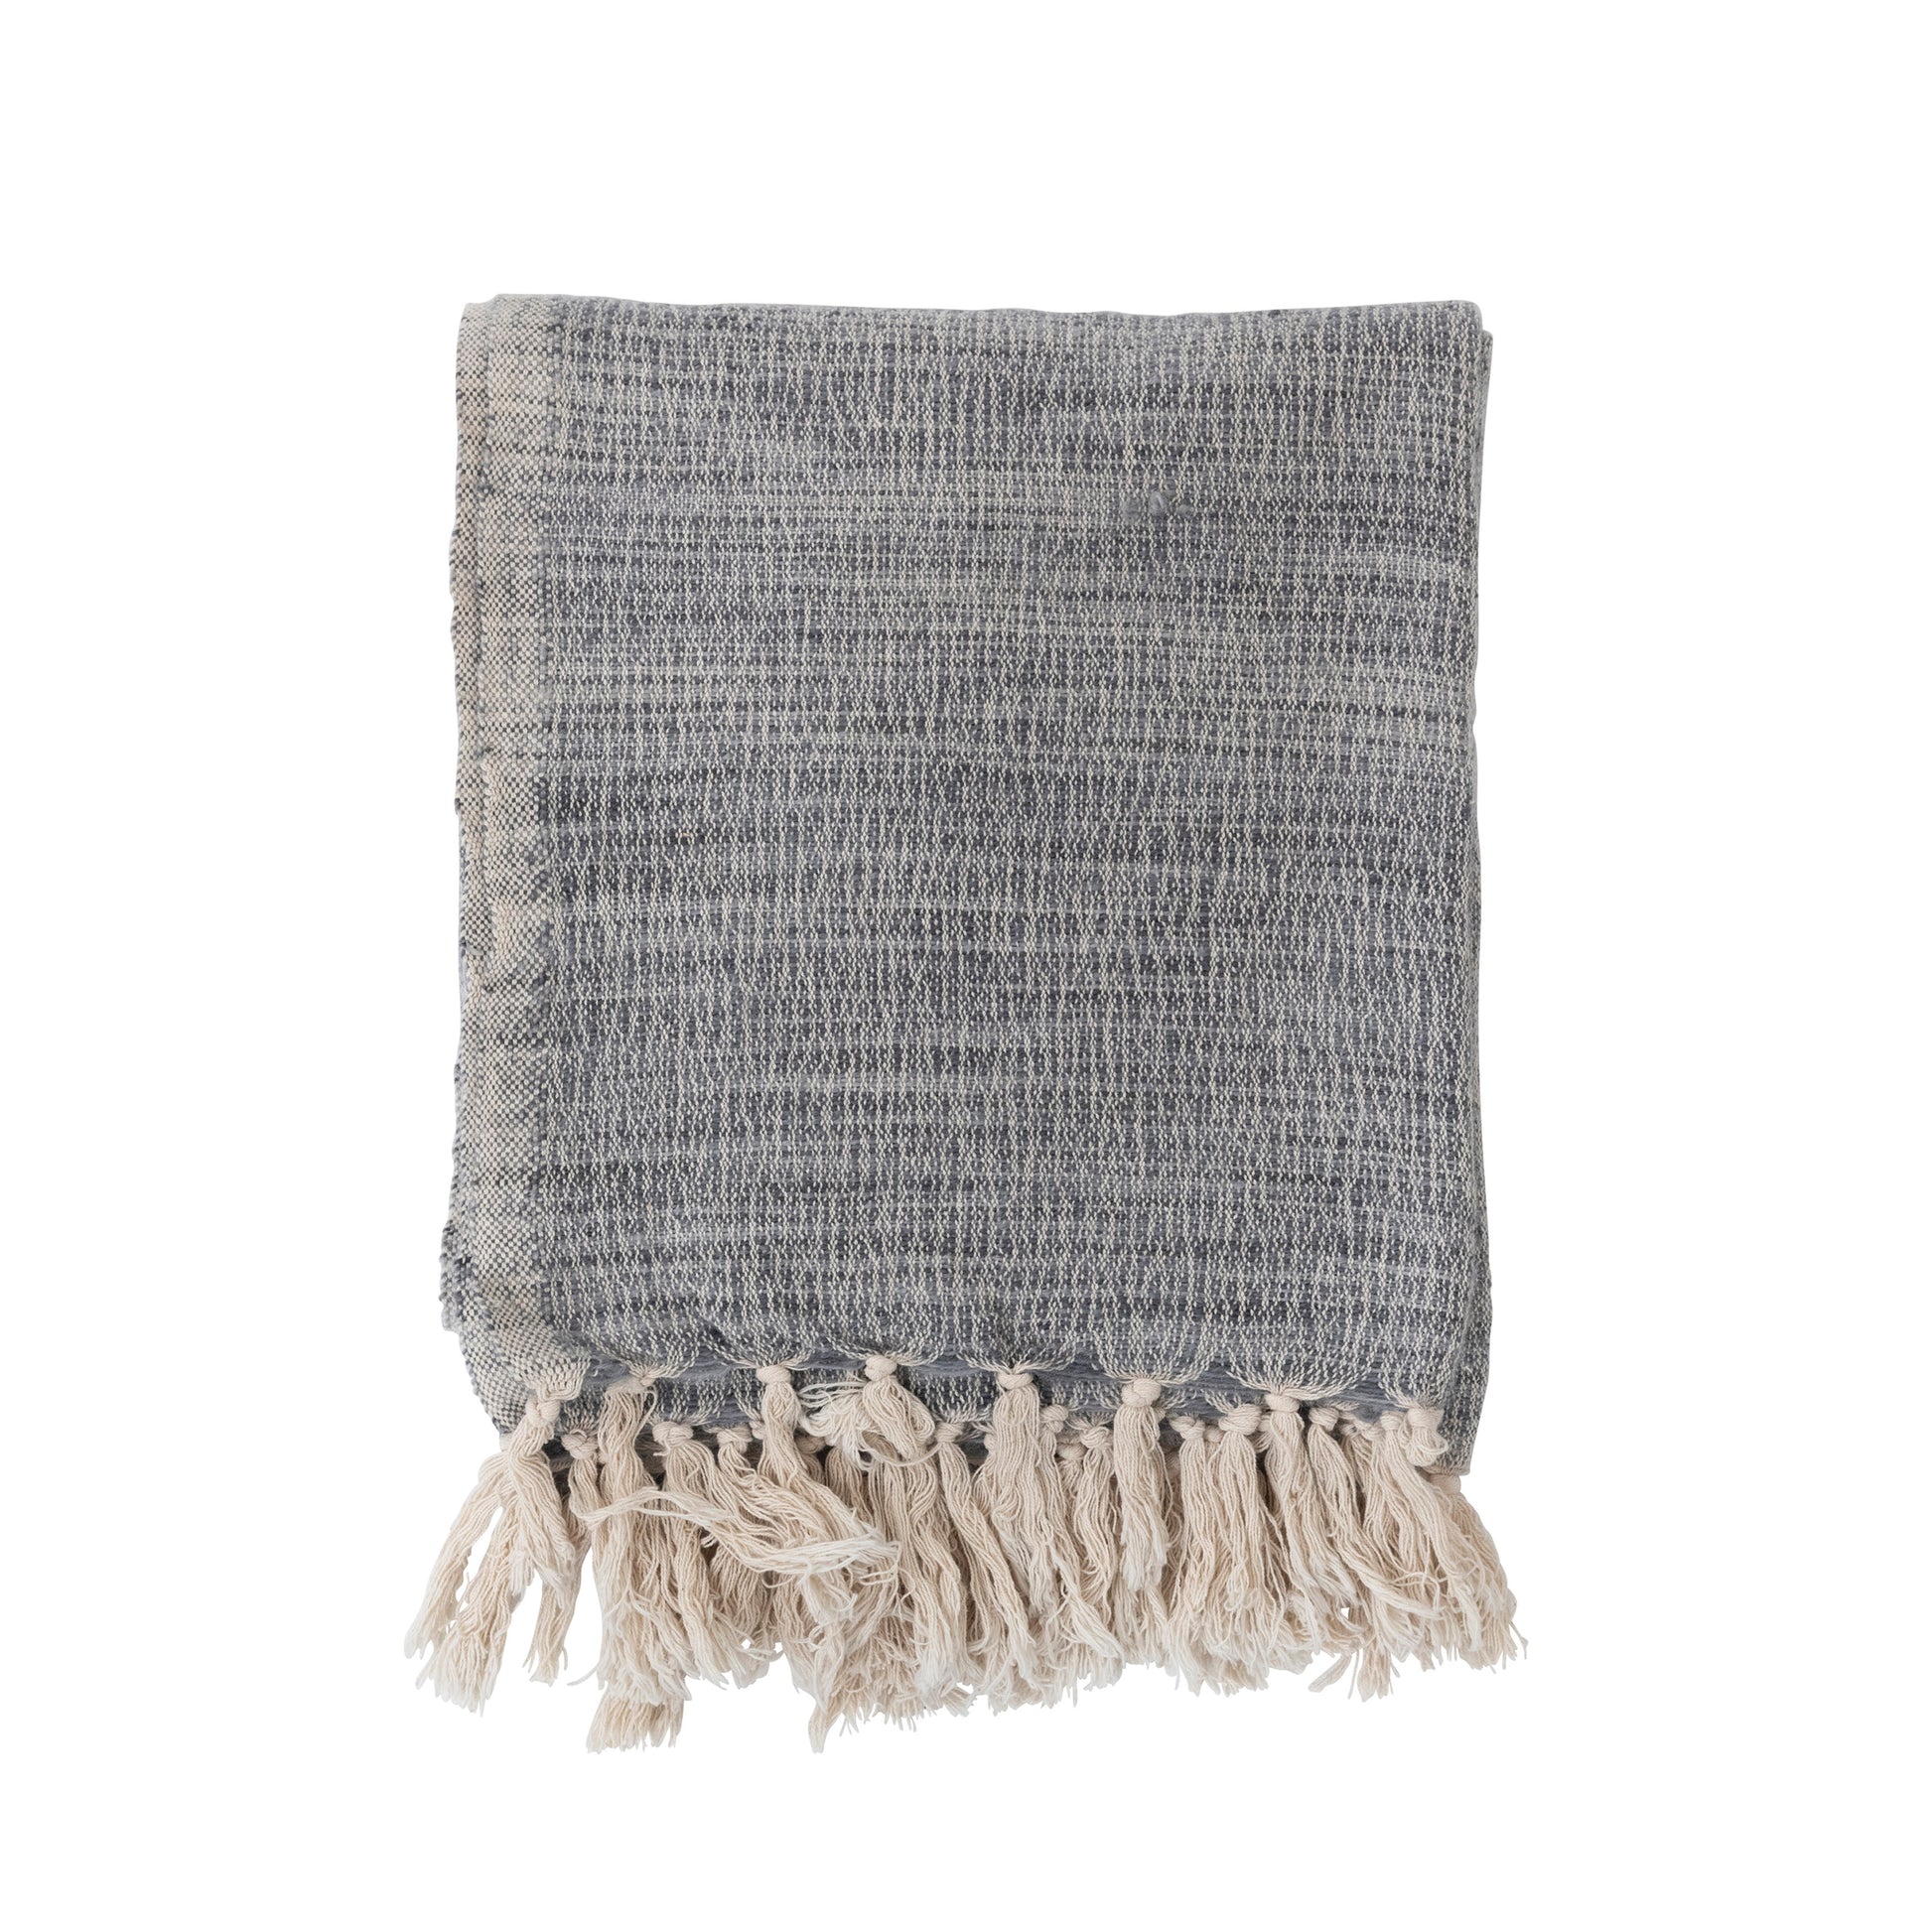 Winter Wool Blanket - A cozy and luxurious Winter Wool Blanket from GRACE BLU SHOPPE, keeping you warm and comfortable during cold nights.